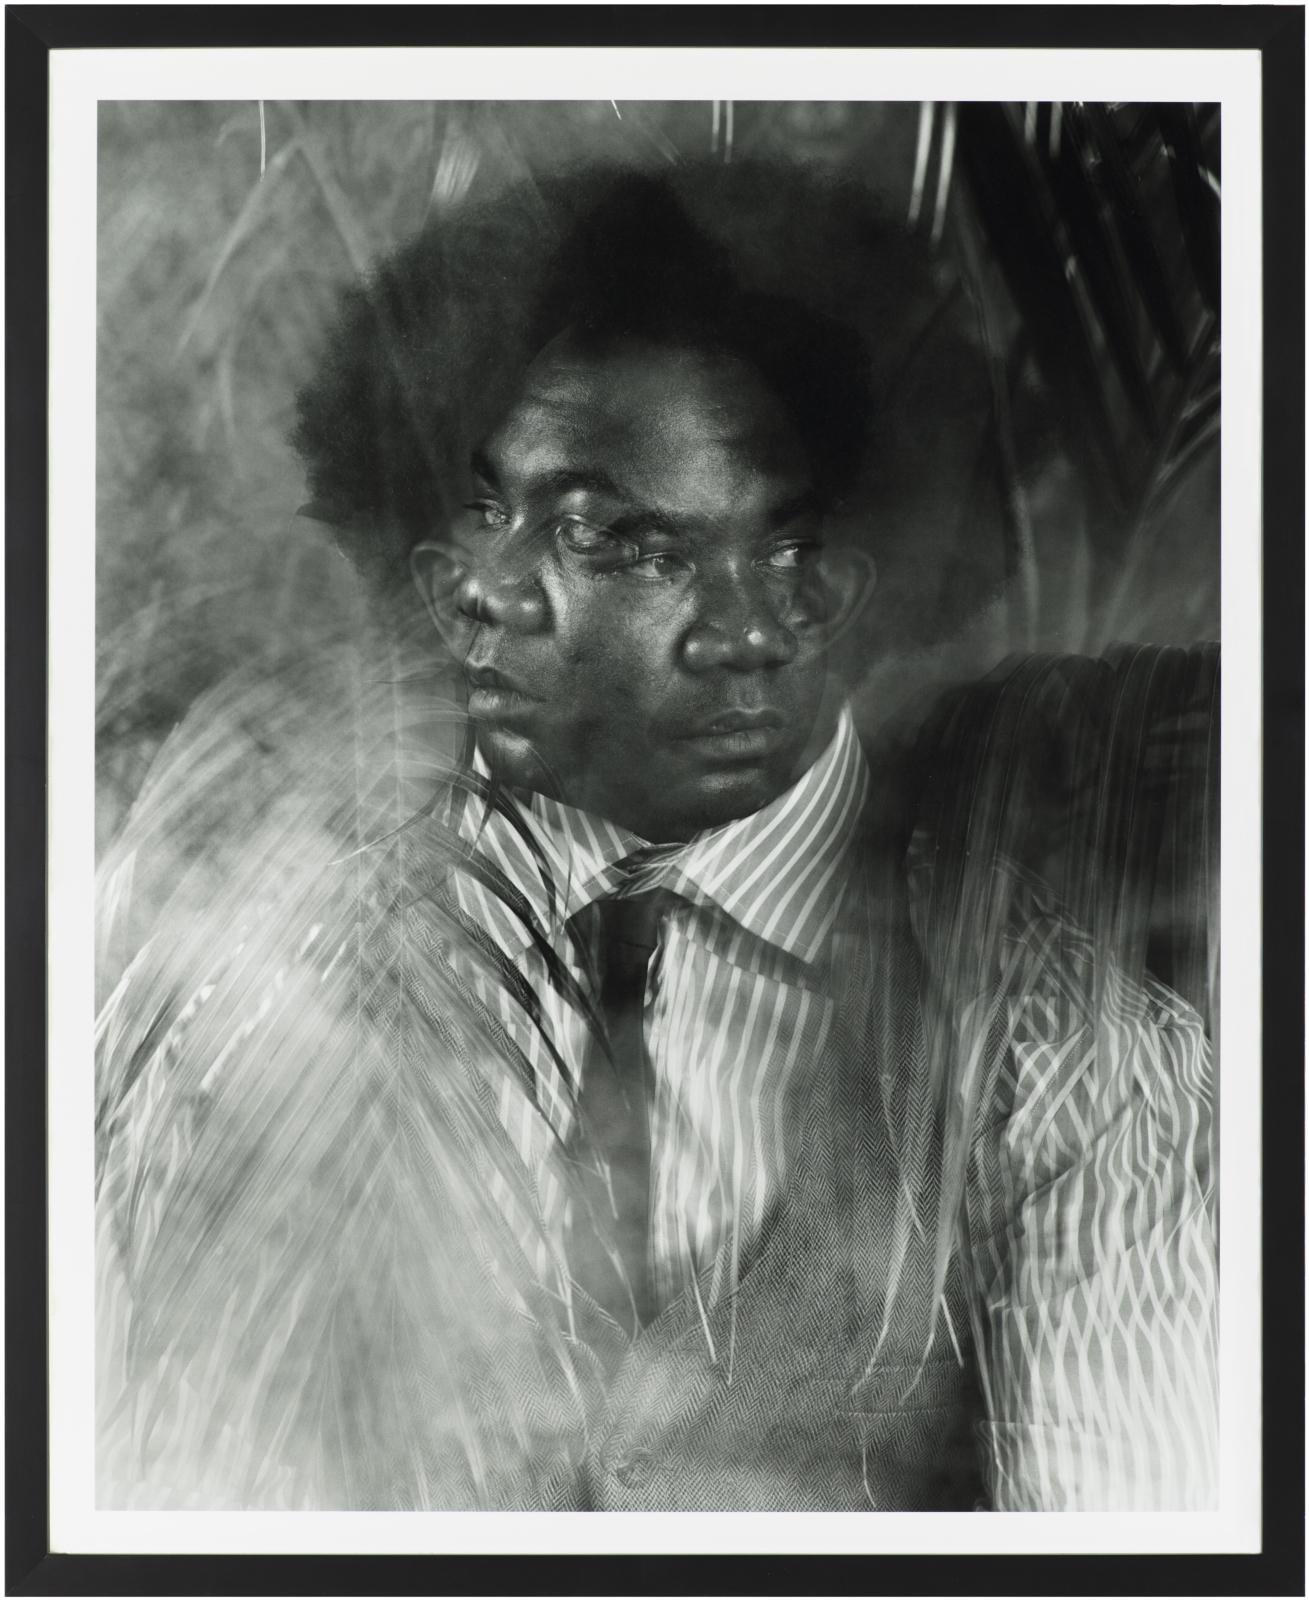 This black and white vertical portrait portrays a dark-skinned person with two faces, one looking left and the other looking right, with palm-like fronds surrounding the figure.